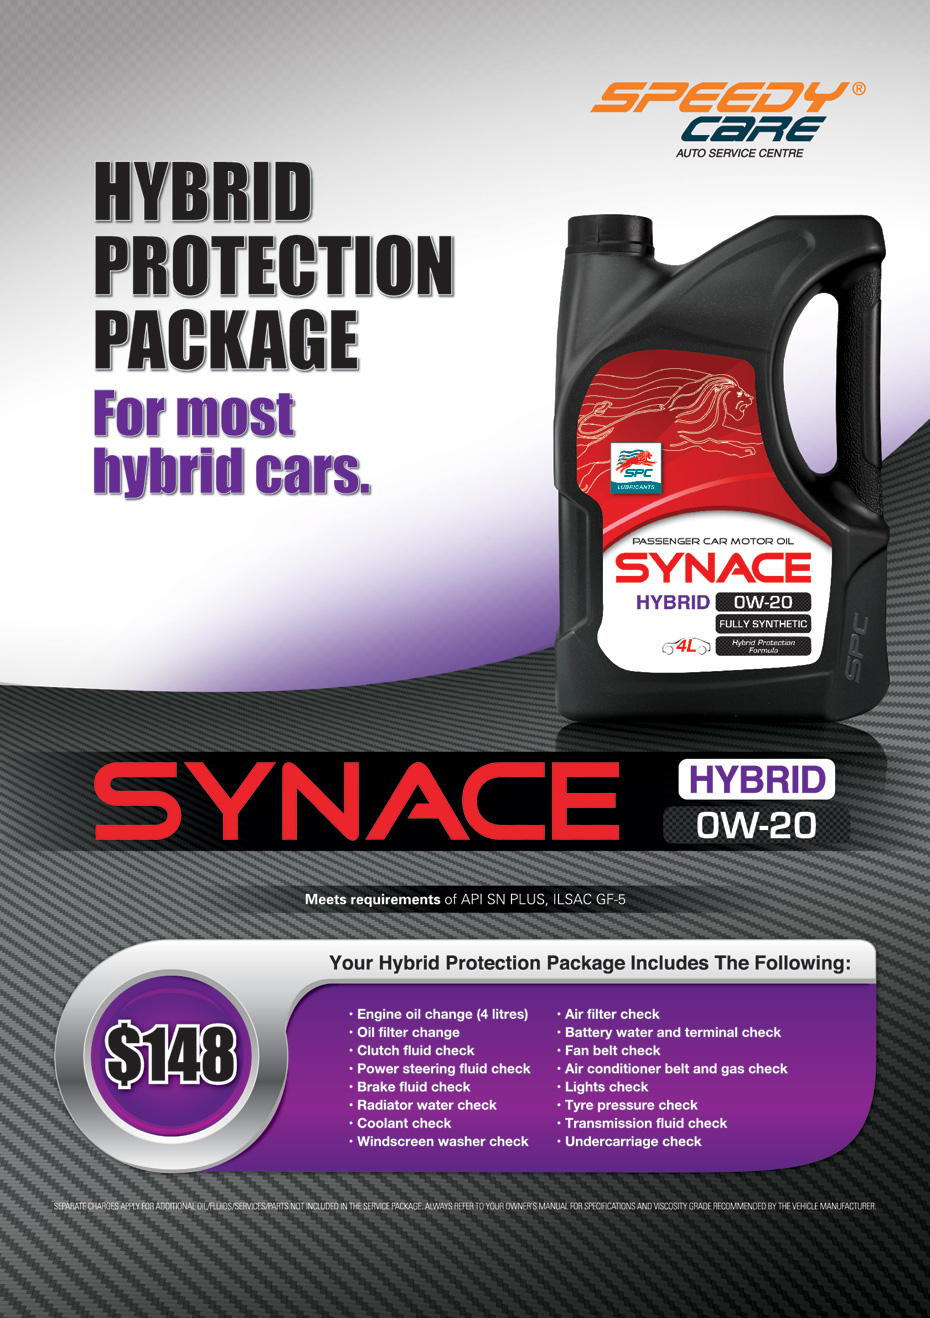 Hybrid Protection Package